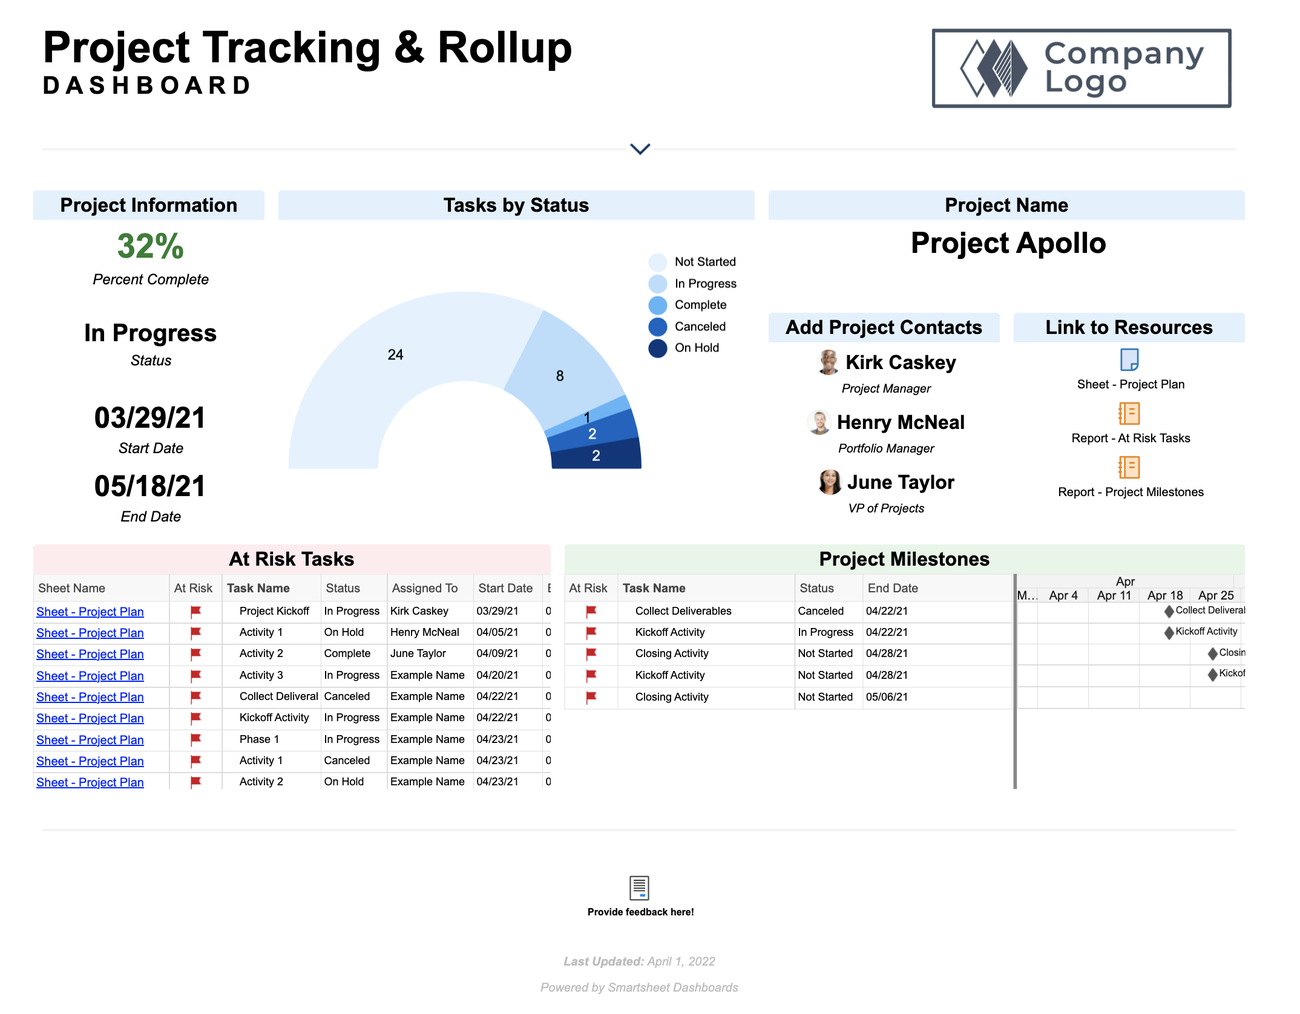 A picture of Smartsheet’s Project Tracking & Rollup dashboard 